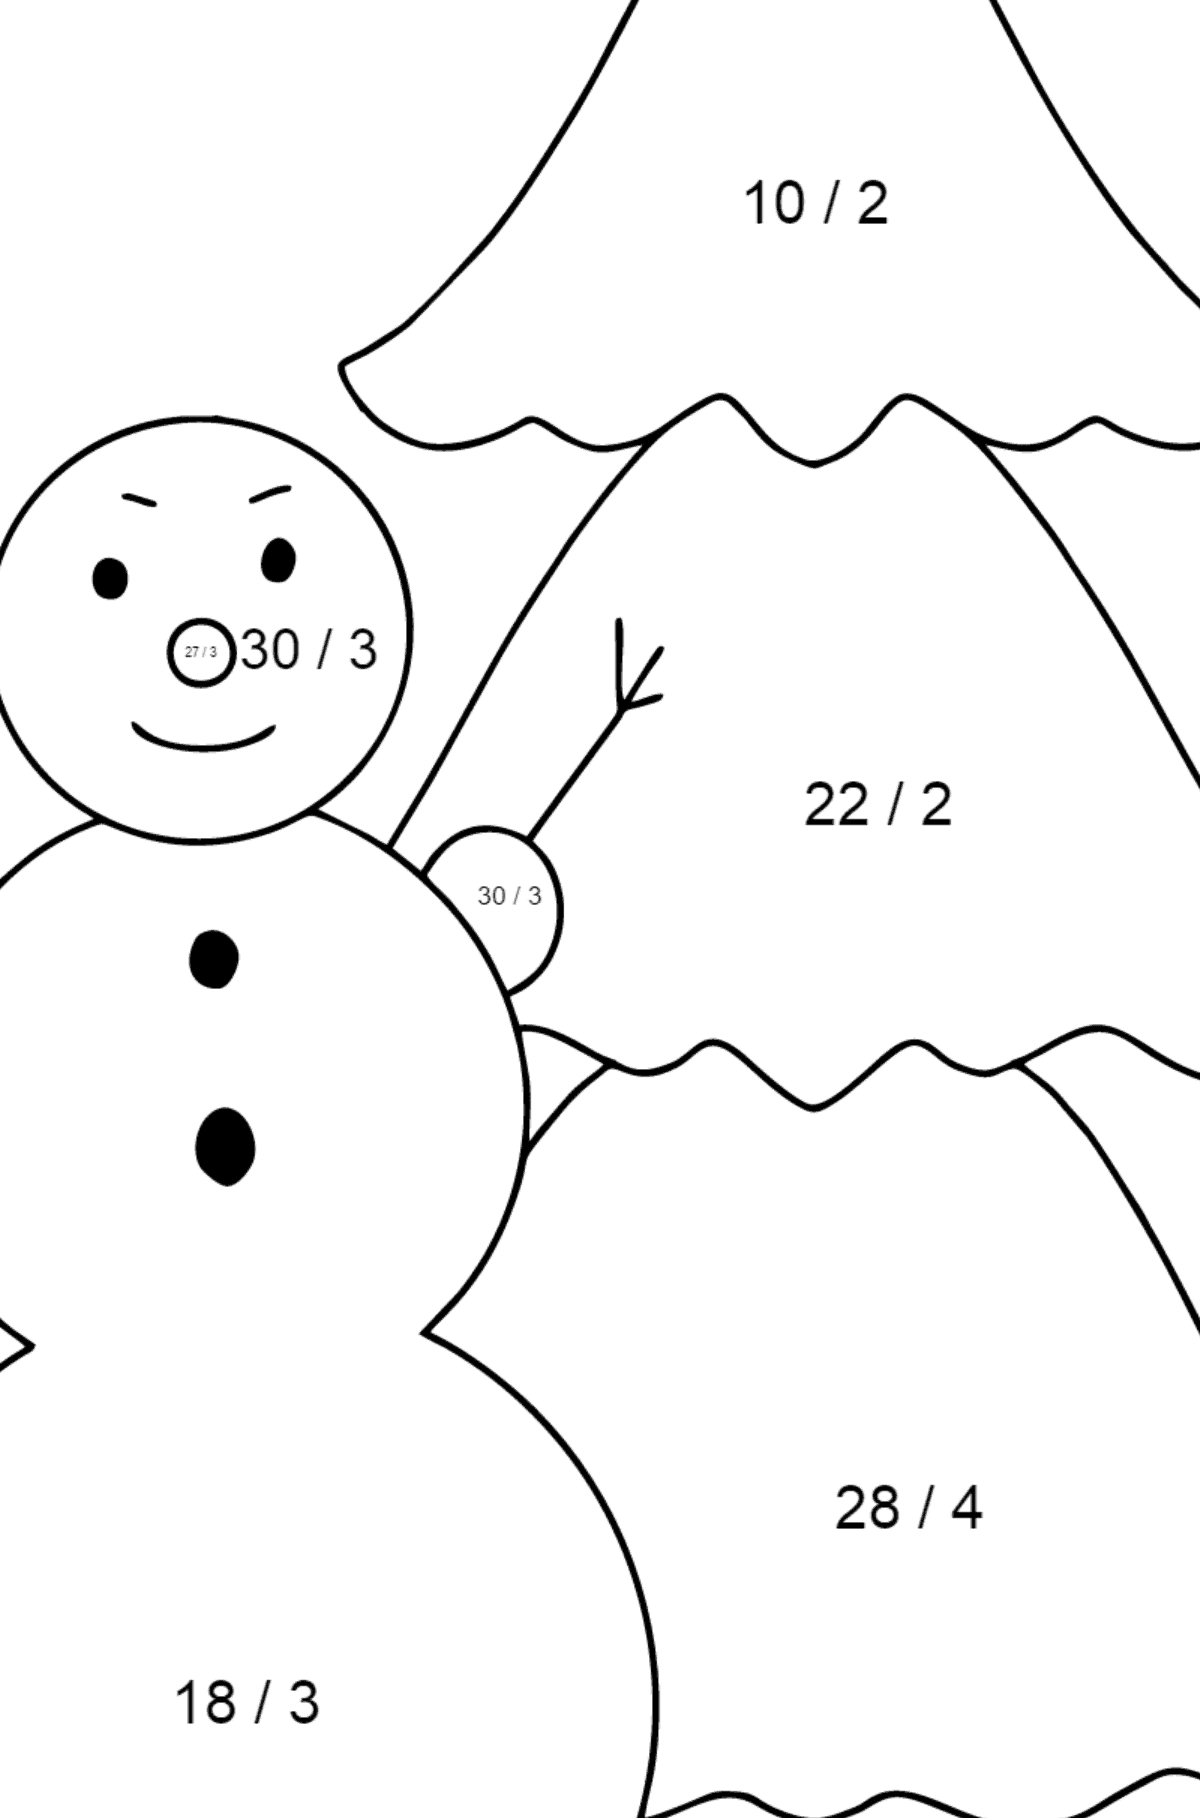 Snowman coloring page for kids - Math Coloring - Division for Kids